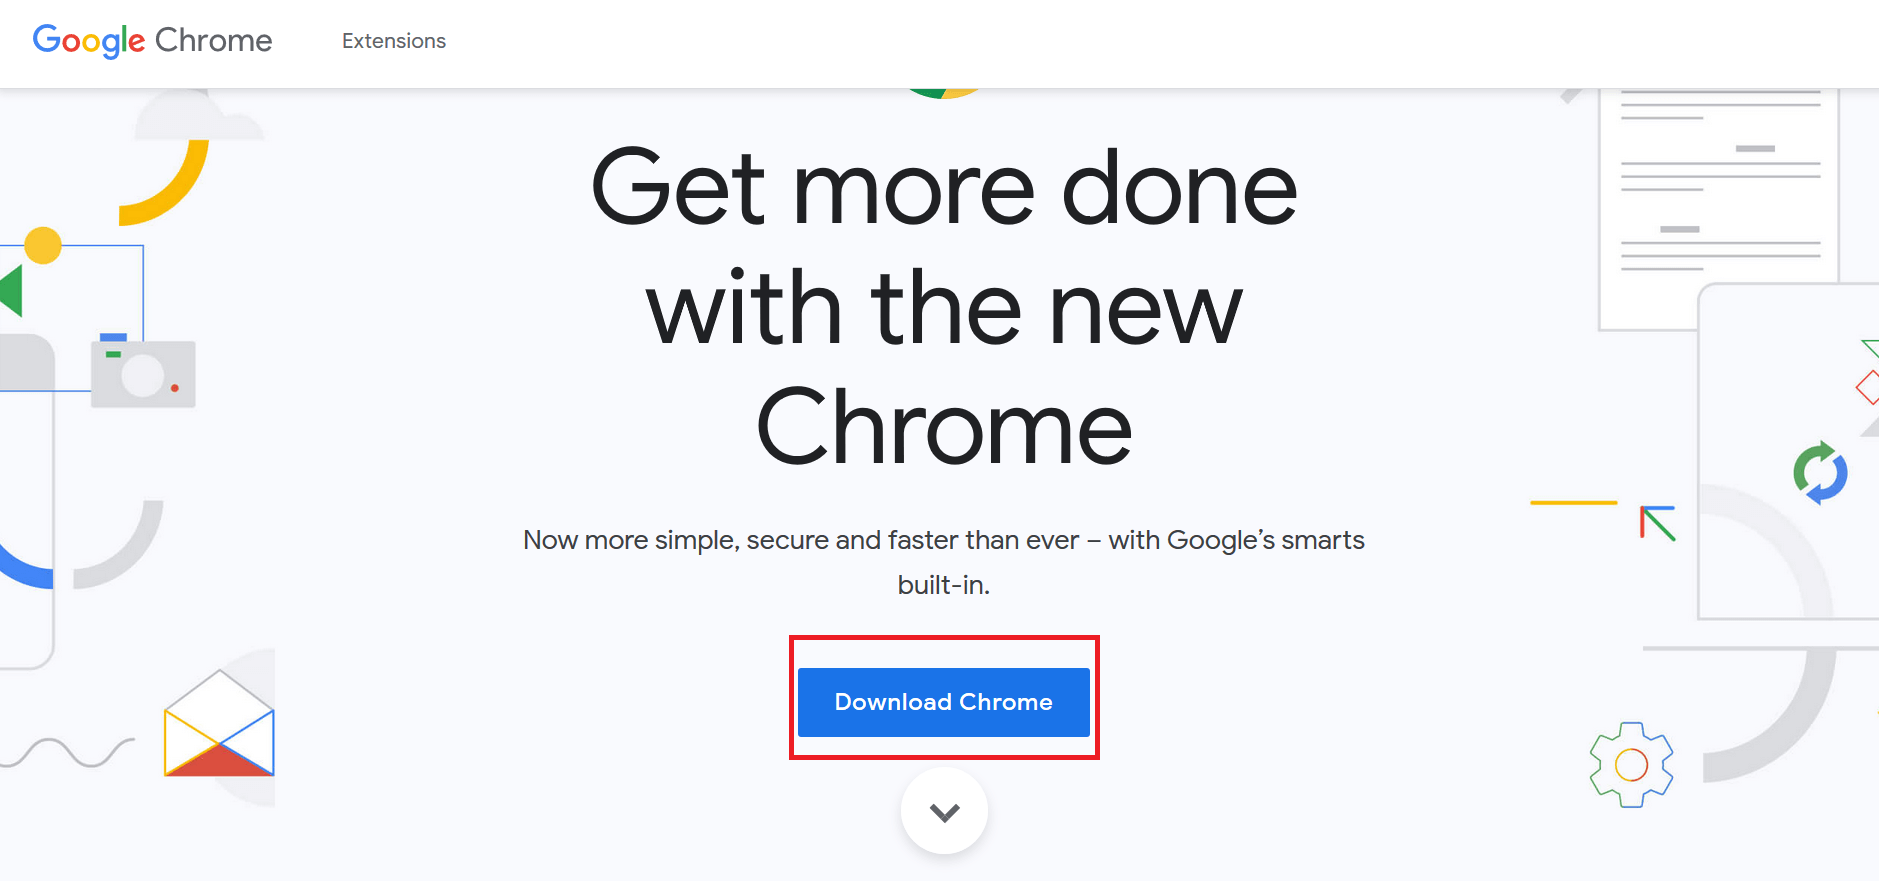 click on the Download Chrome button to download the latest version of Chrome Installer.